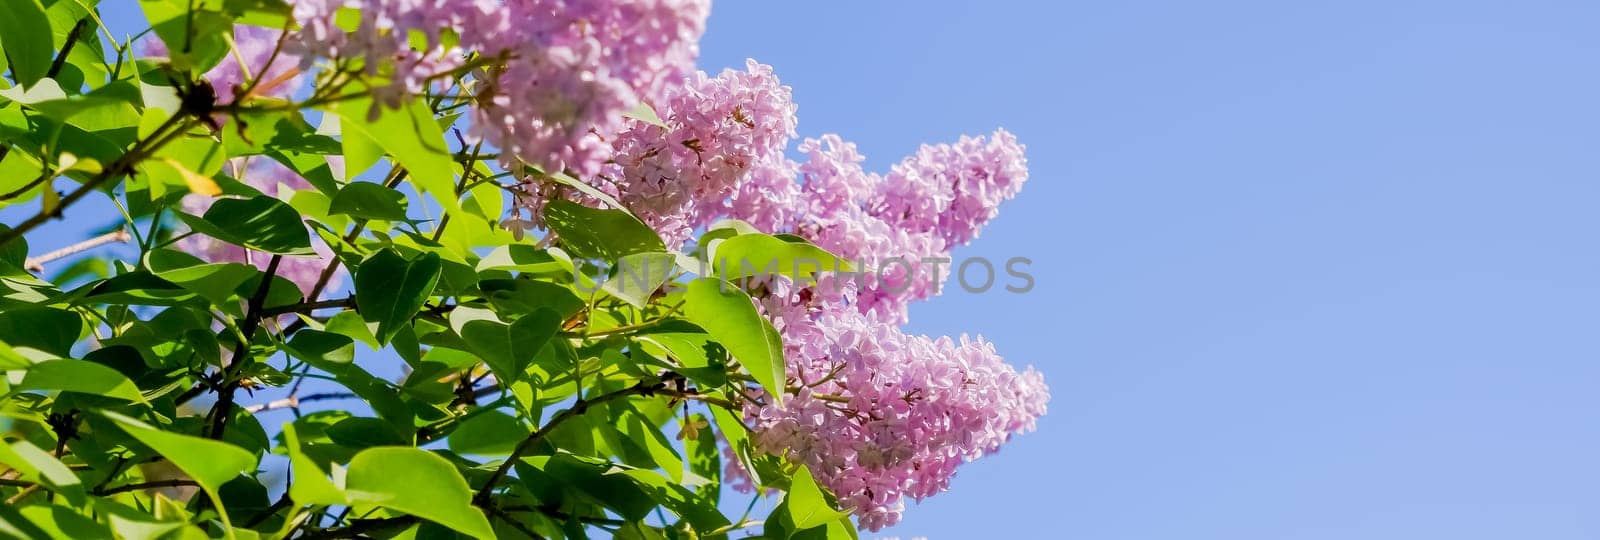 Lilac bush over sky background. Lilac flowers in garden or park. Nature background, banner.Natural blooming fresh lilac tree flowers in Garden .Sunny spring day.Selective focus by YuliaYaspe1979